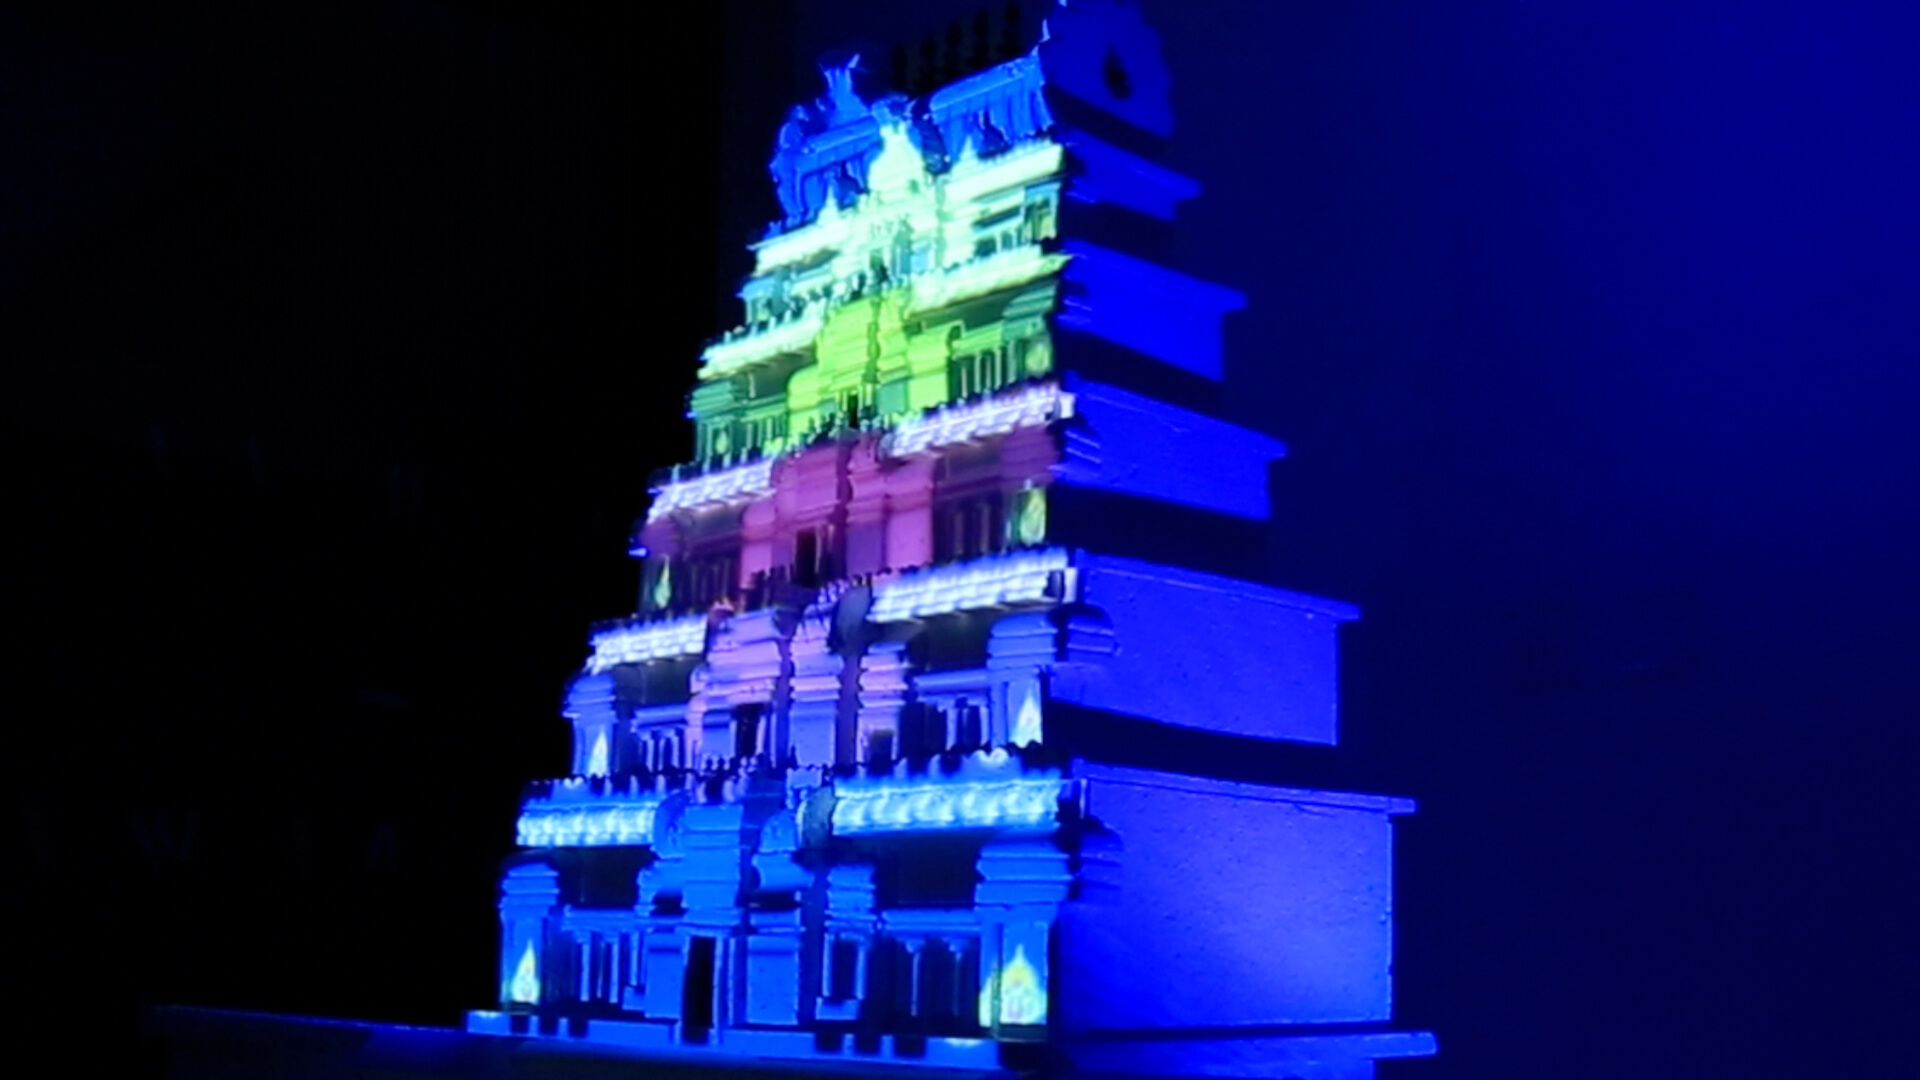 temple projection mapping, srushti, image mapping, holographic projection